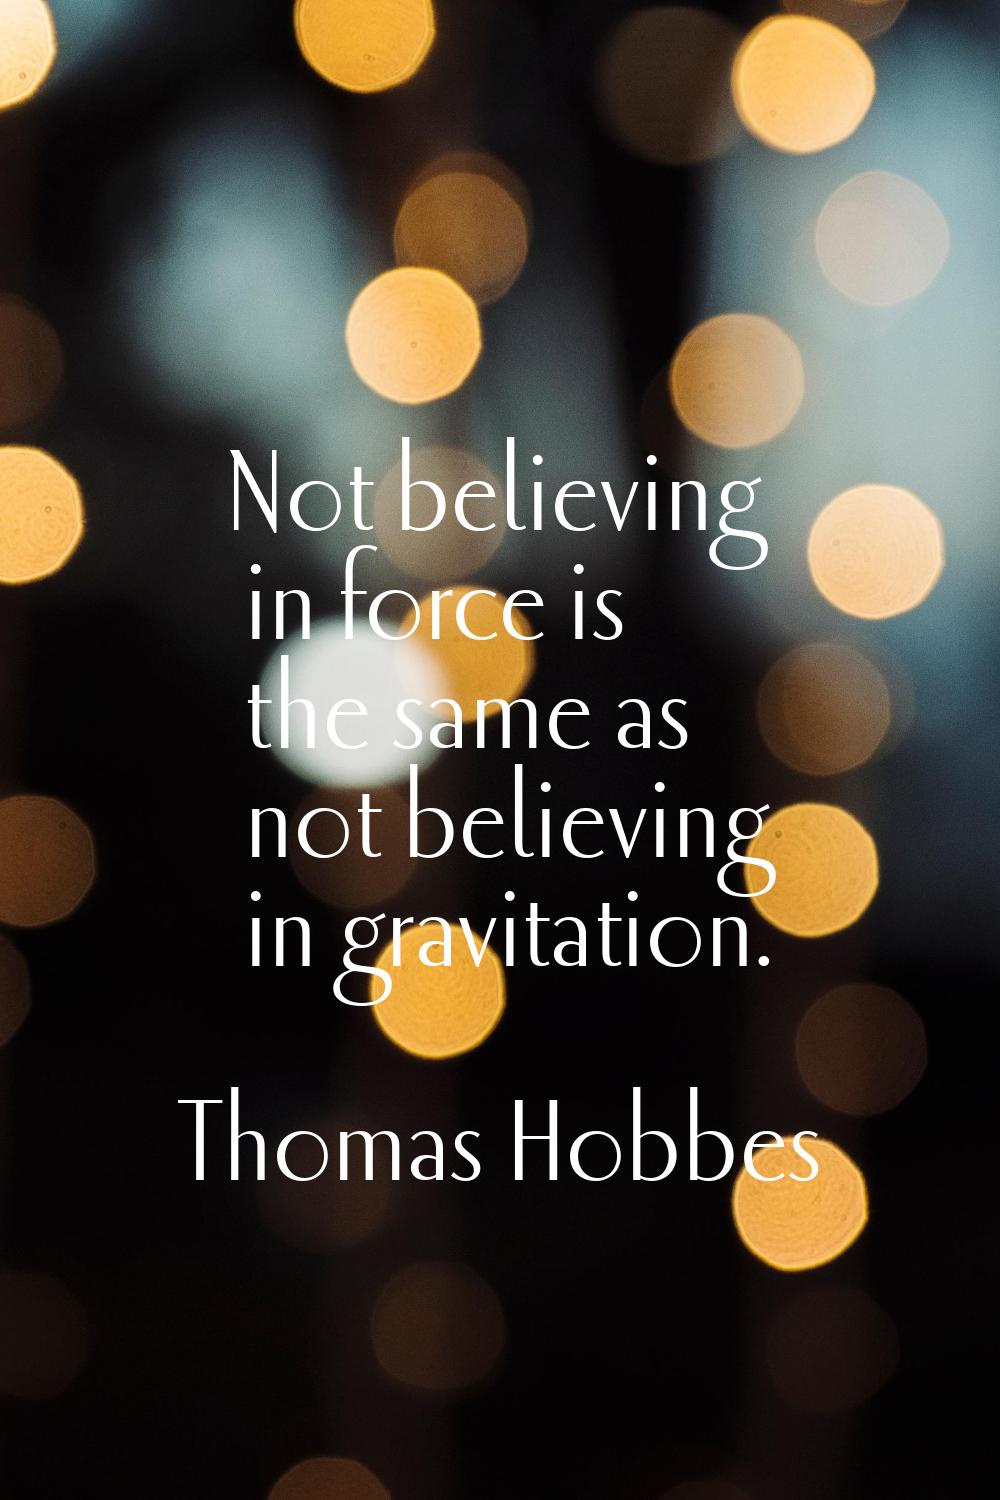 Not believing in force is the same as not believing in gravitation.